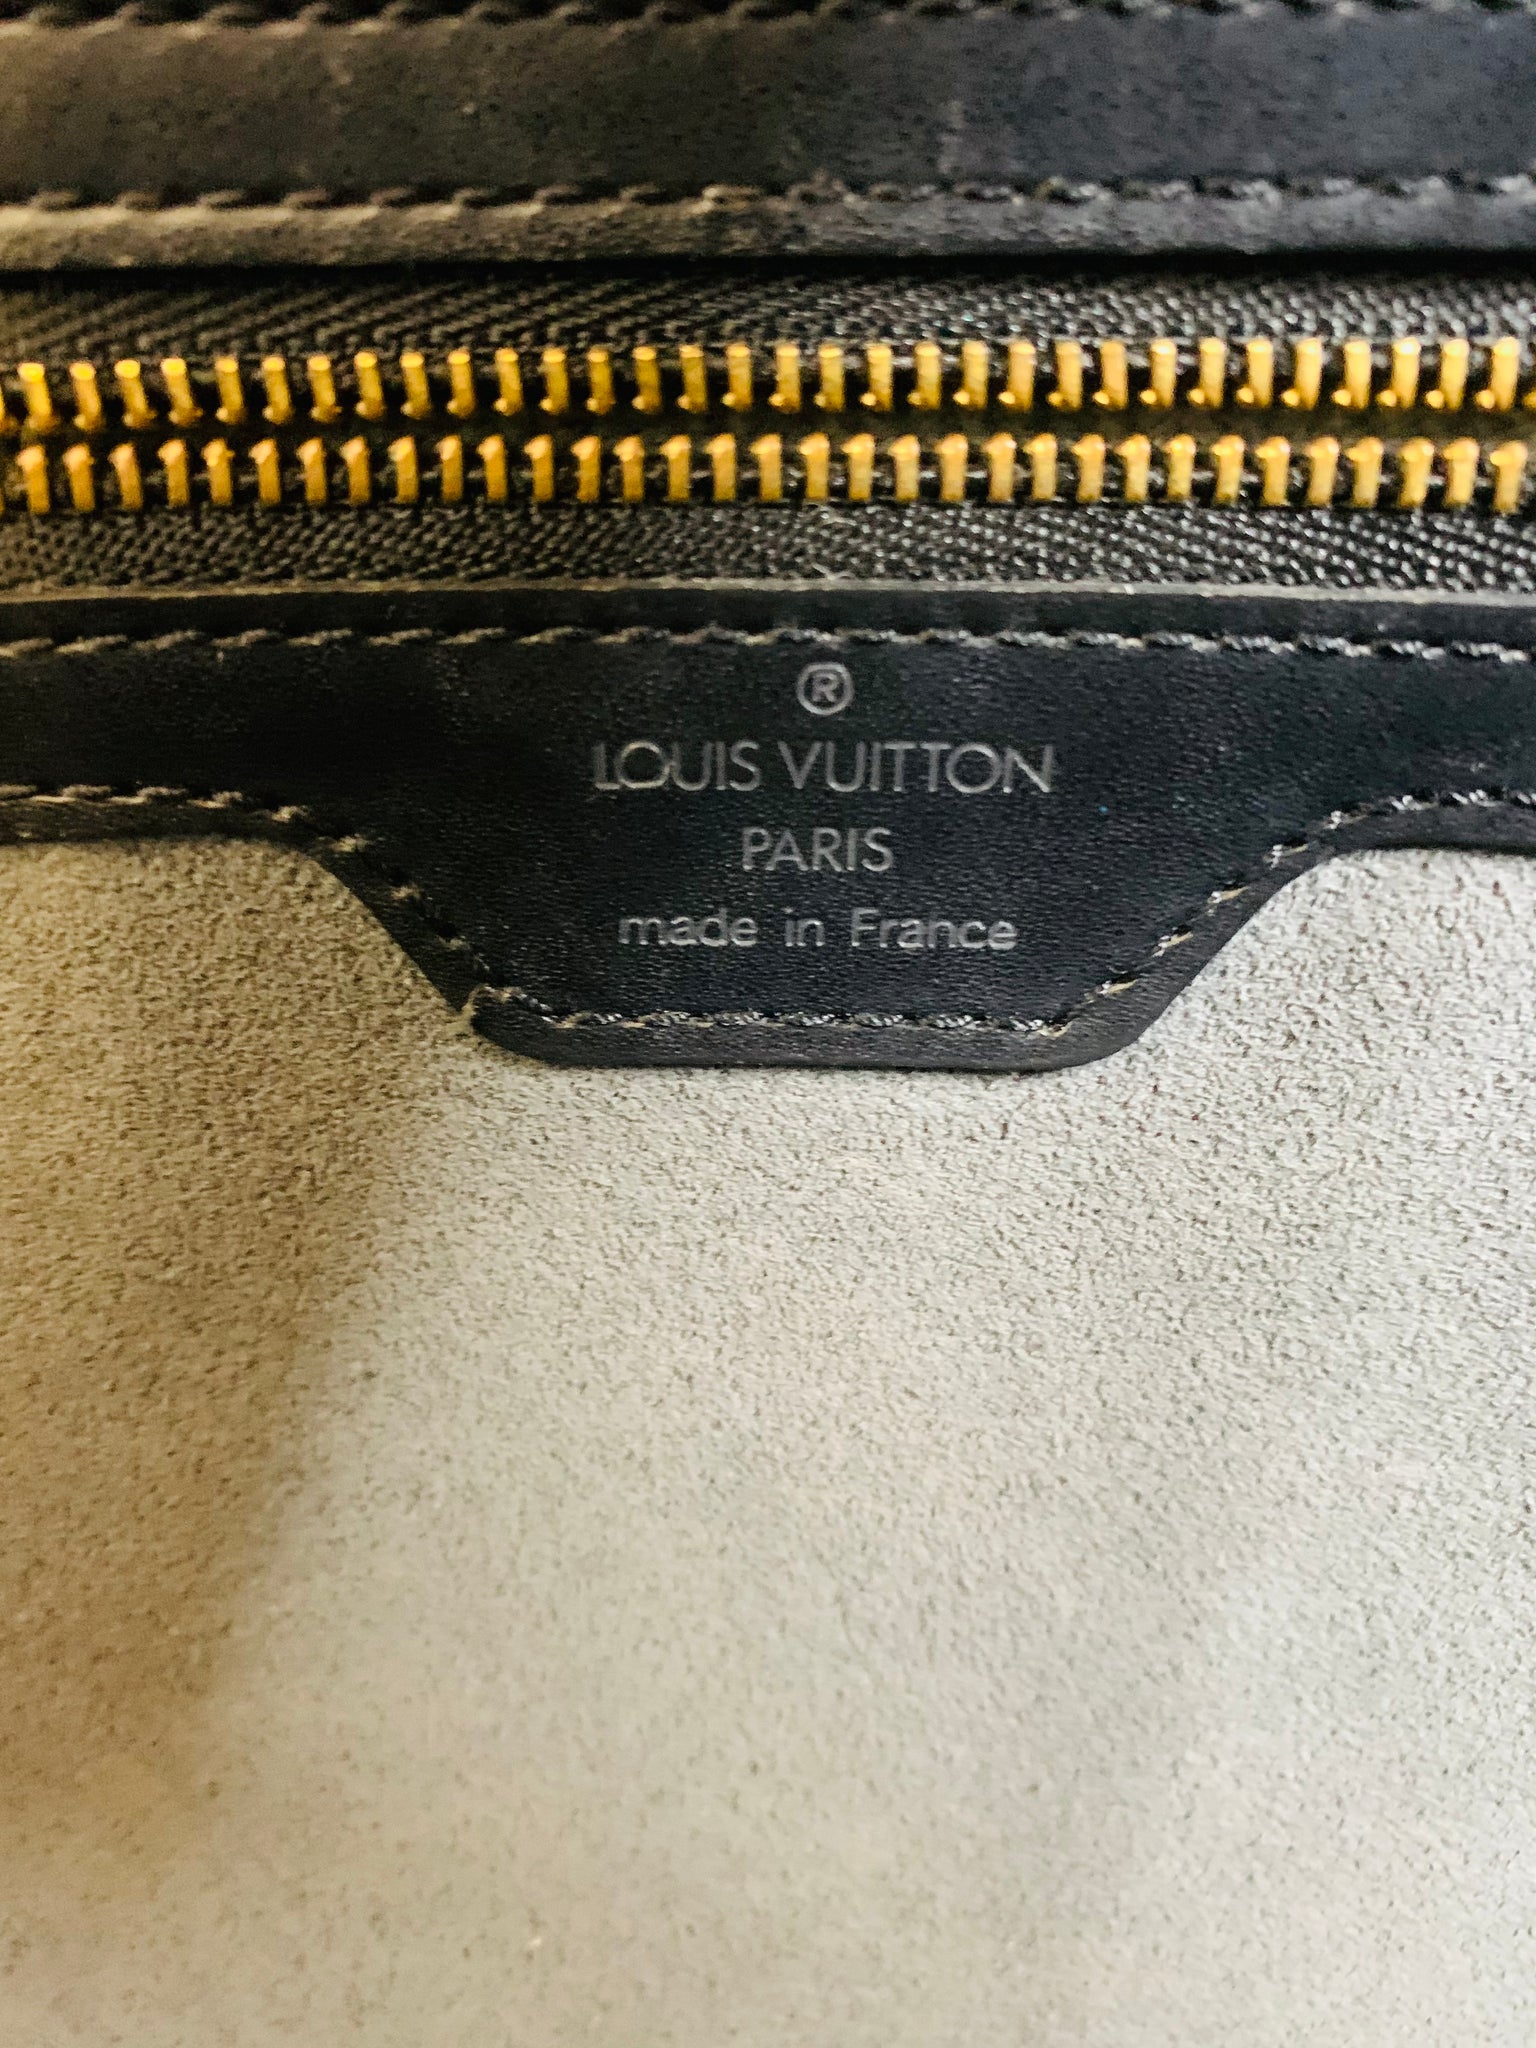 LOUIS VUITTON, Lussac bag in black epi leather and gold …